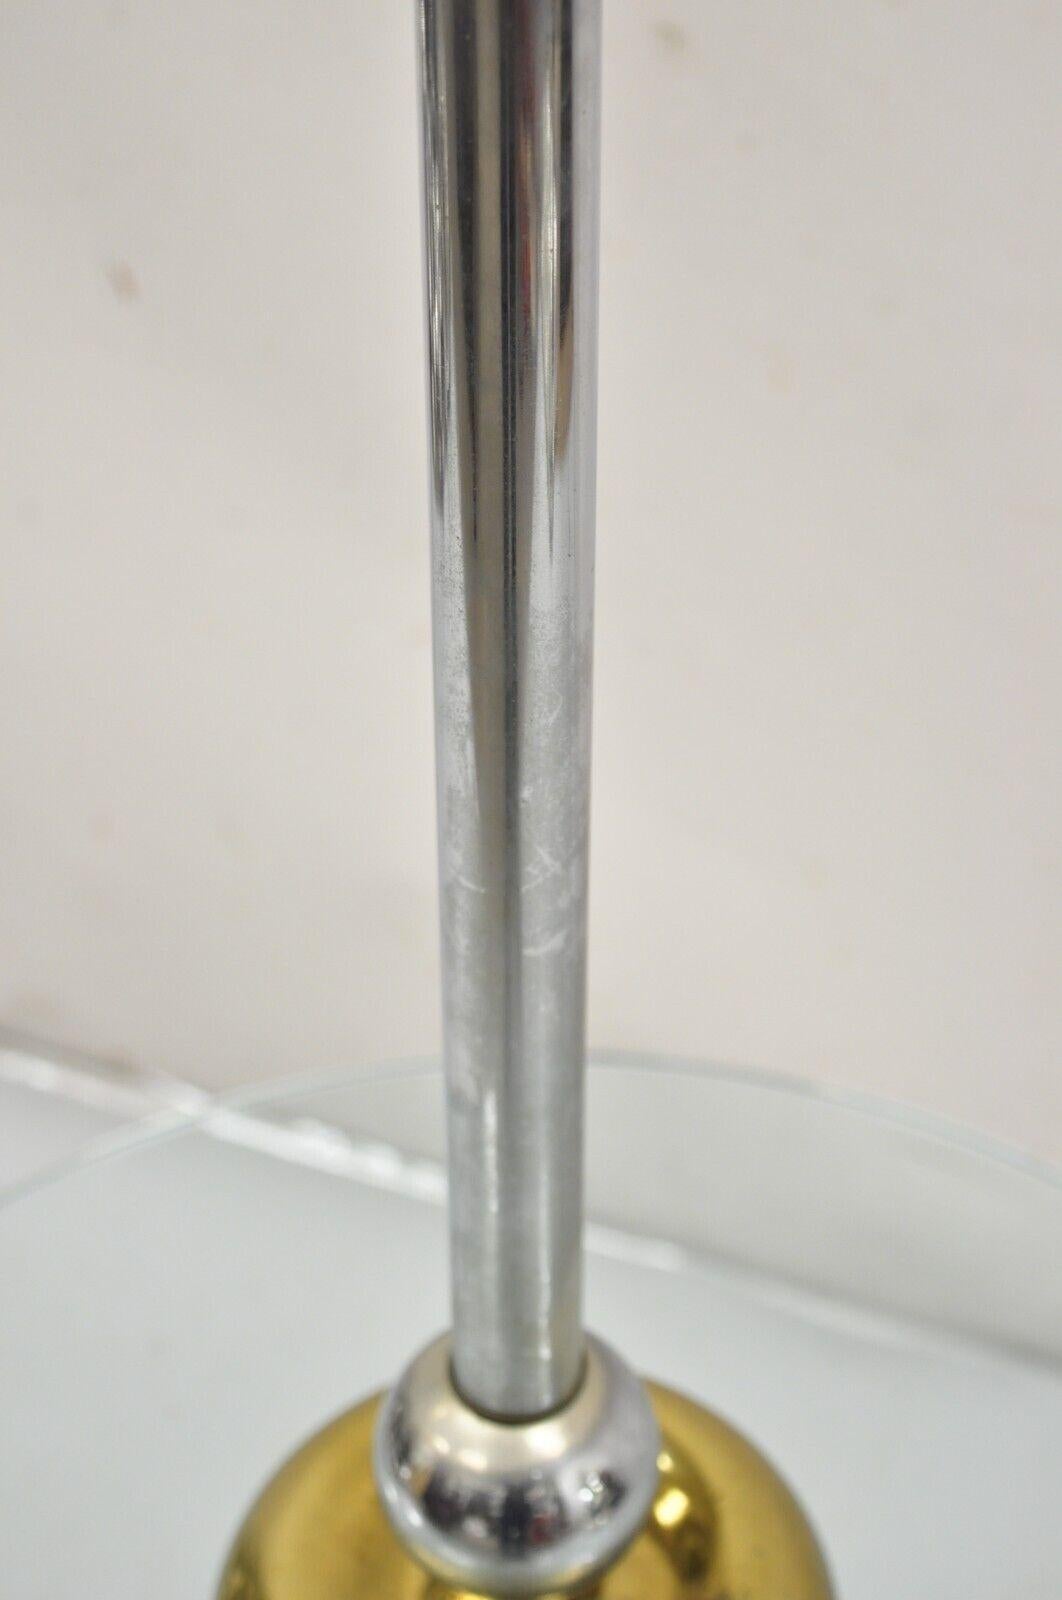 Late 20th Century Mid Century Modern Space Age Atomic Era Chrome Brass Glass Side Table Floor Lamp For Sale